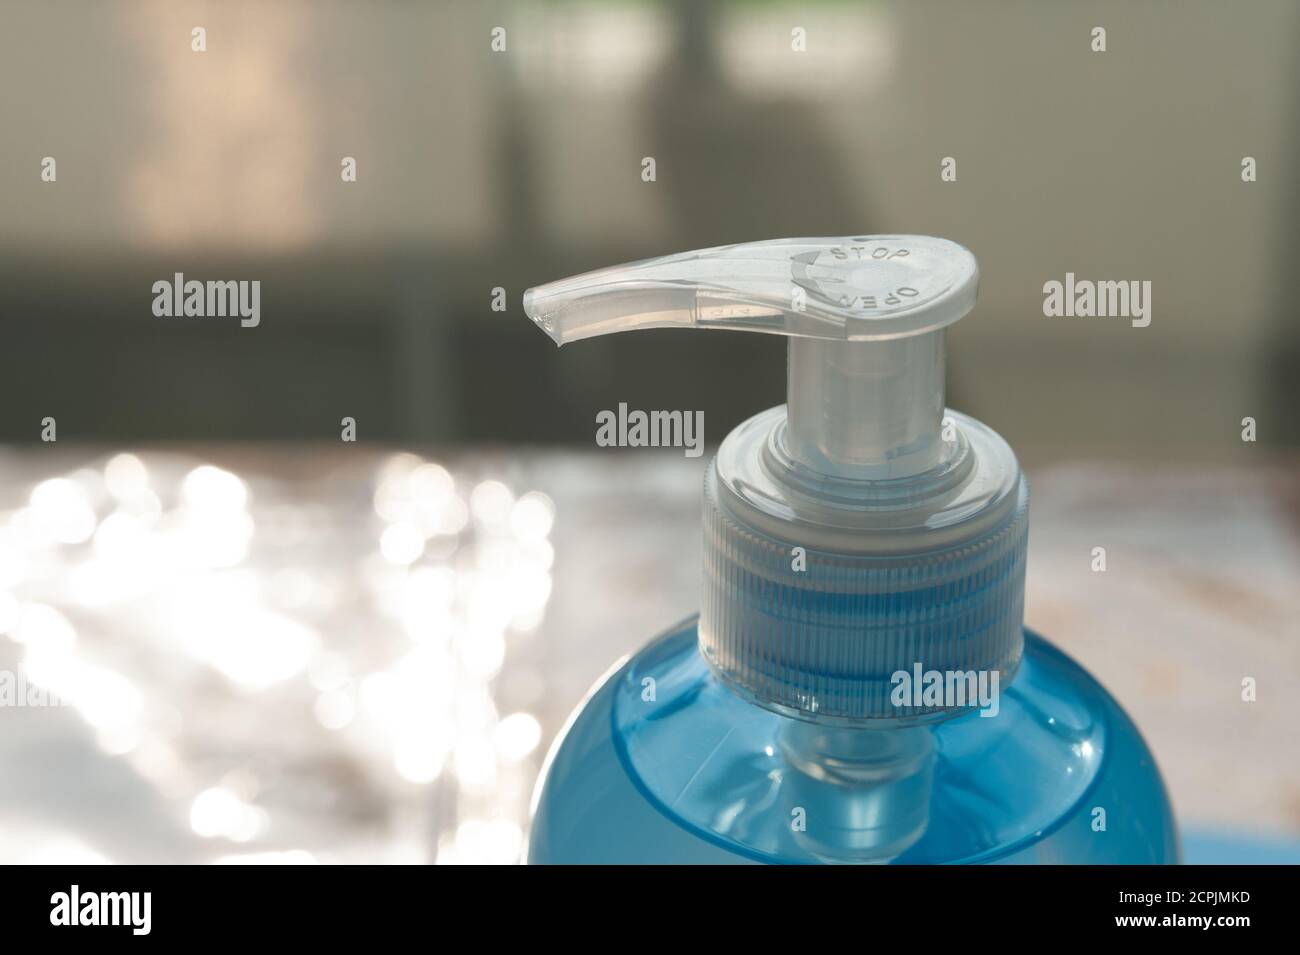 Download Pump Bottle High Resolution Stock Photography And Images Alamy Yellowimages Mockups